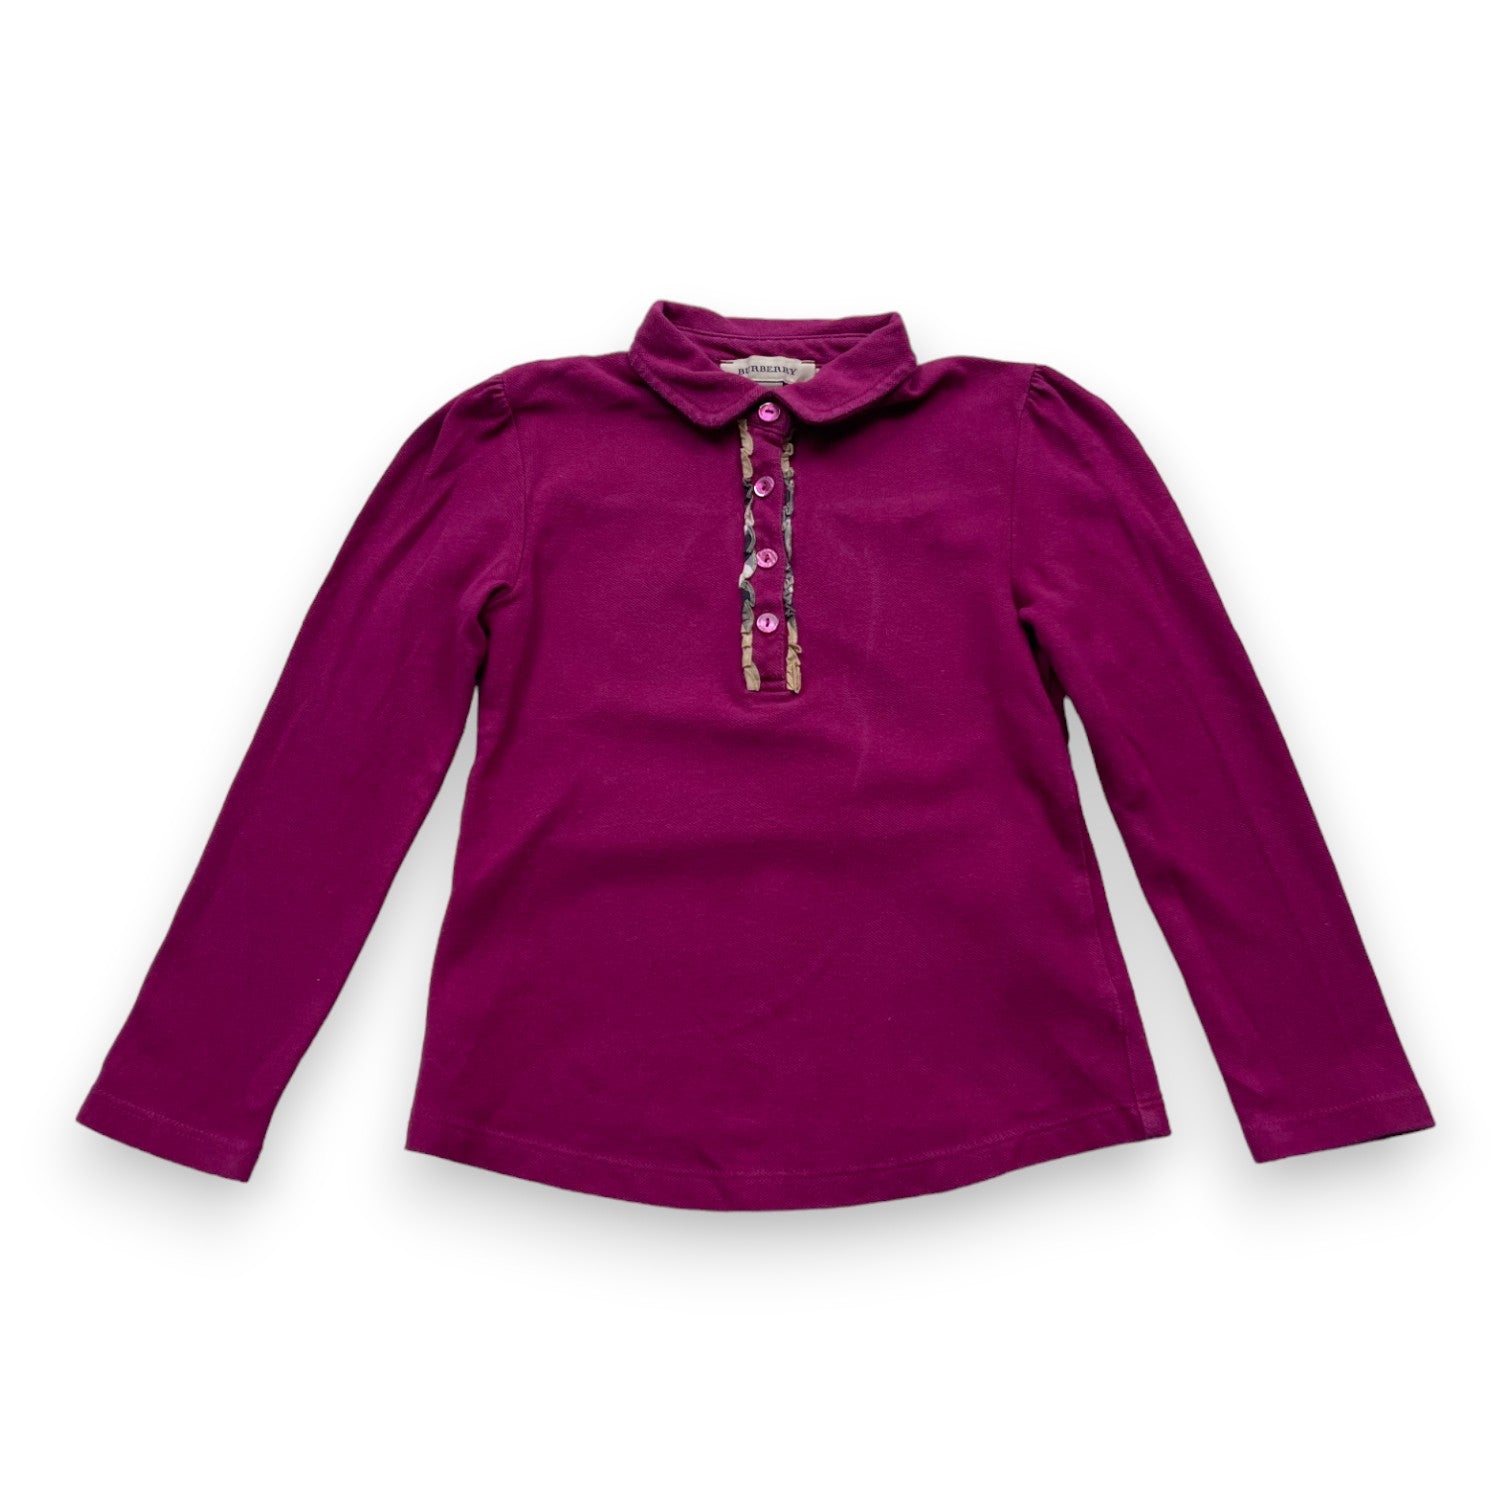 BURBERRY - Polo manches longues violet - 4 ans